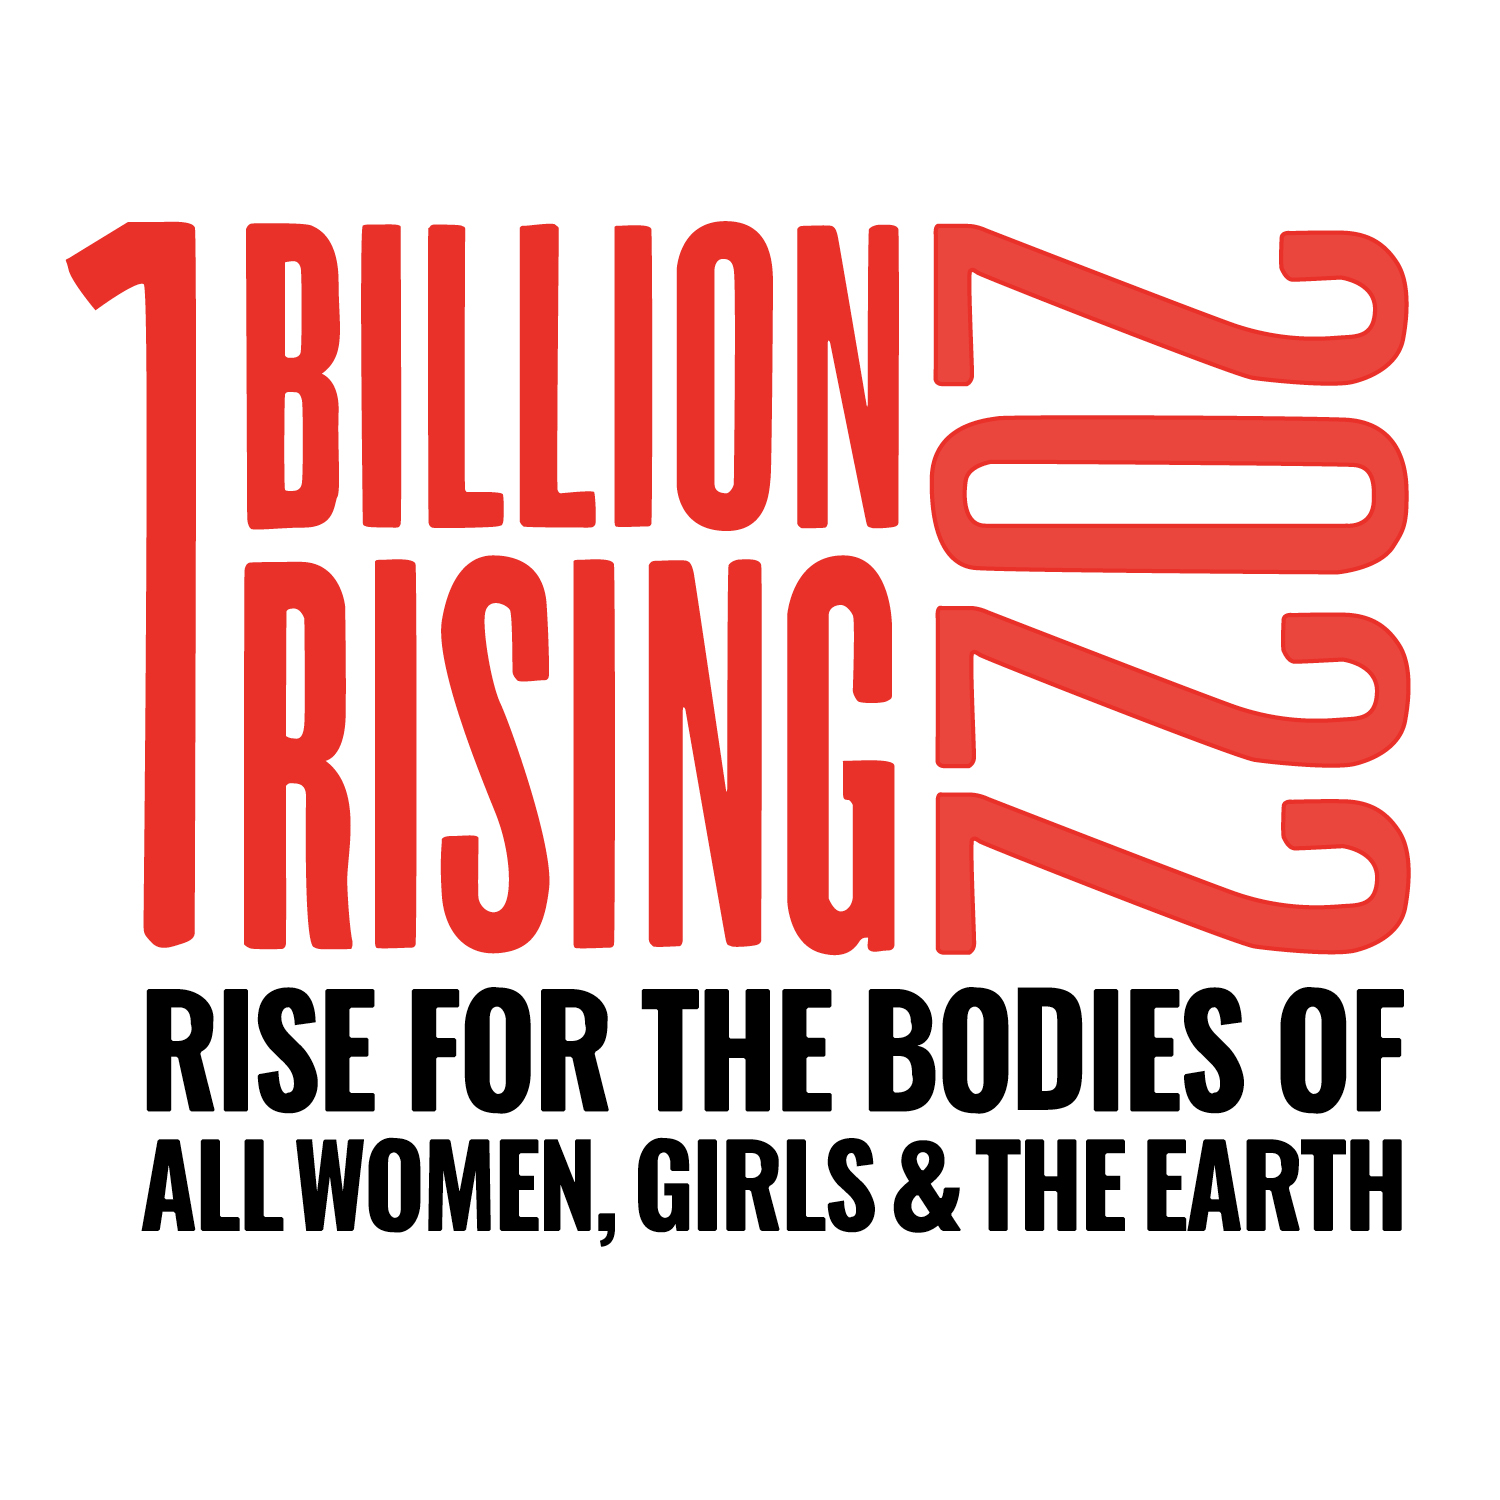 One Billion Rising 2022: Rise for the Bodies of All Women, Girls, & the Earth